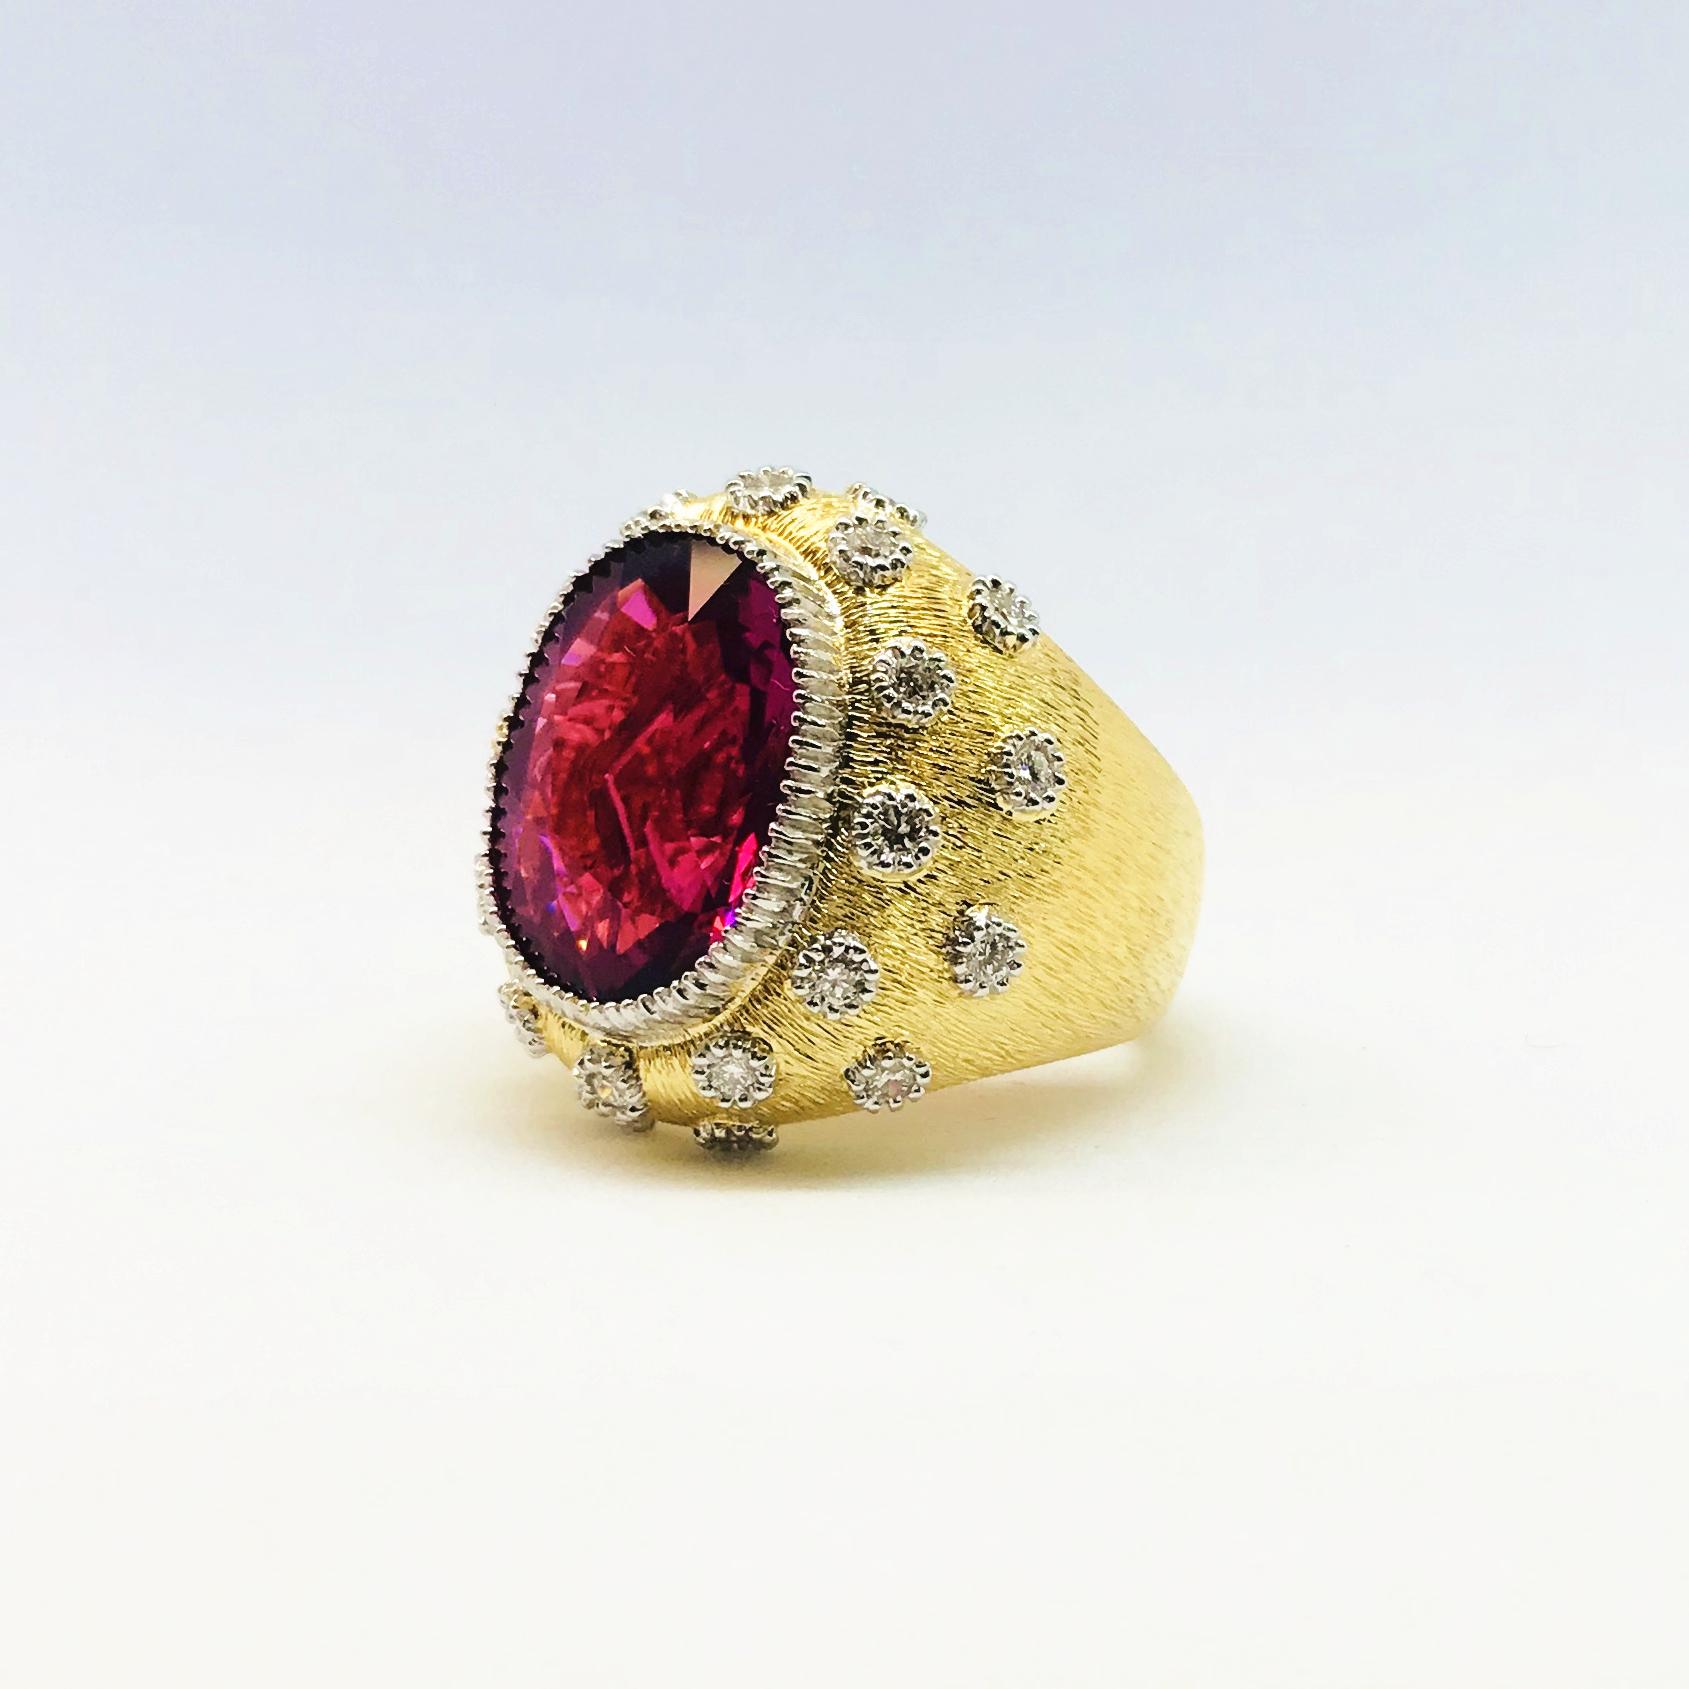 One Rubellite and Diamond yellow and white gold domed shaped ring centering one oval-shaped rubellite weighing approximately 9.97 cts. and accented with 24 white round brilliant cut diamonds arranged around the rubellite in two spaced staggered